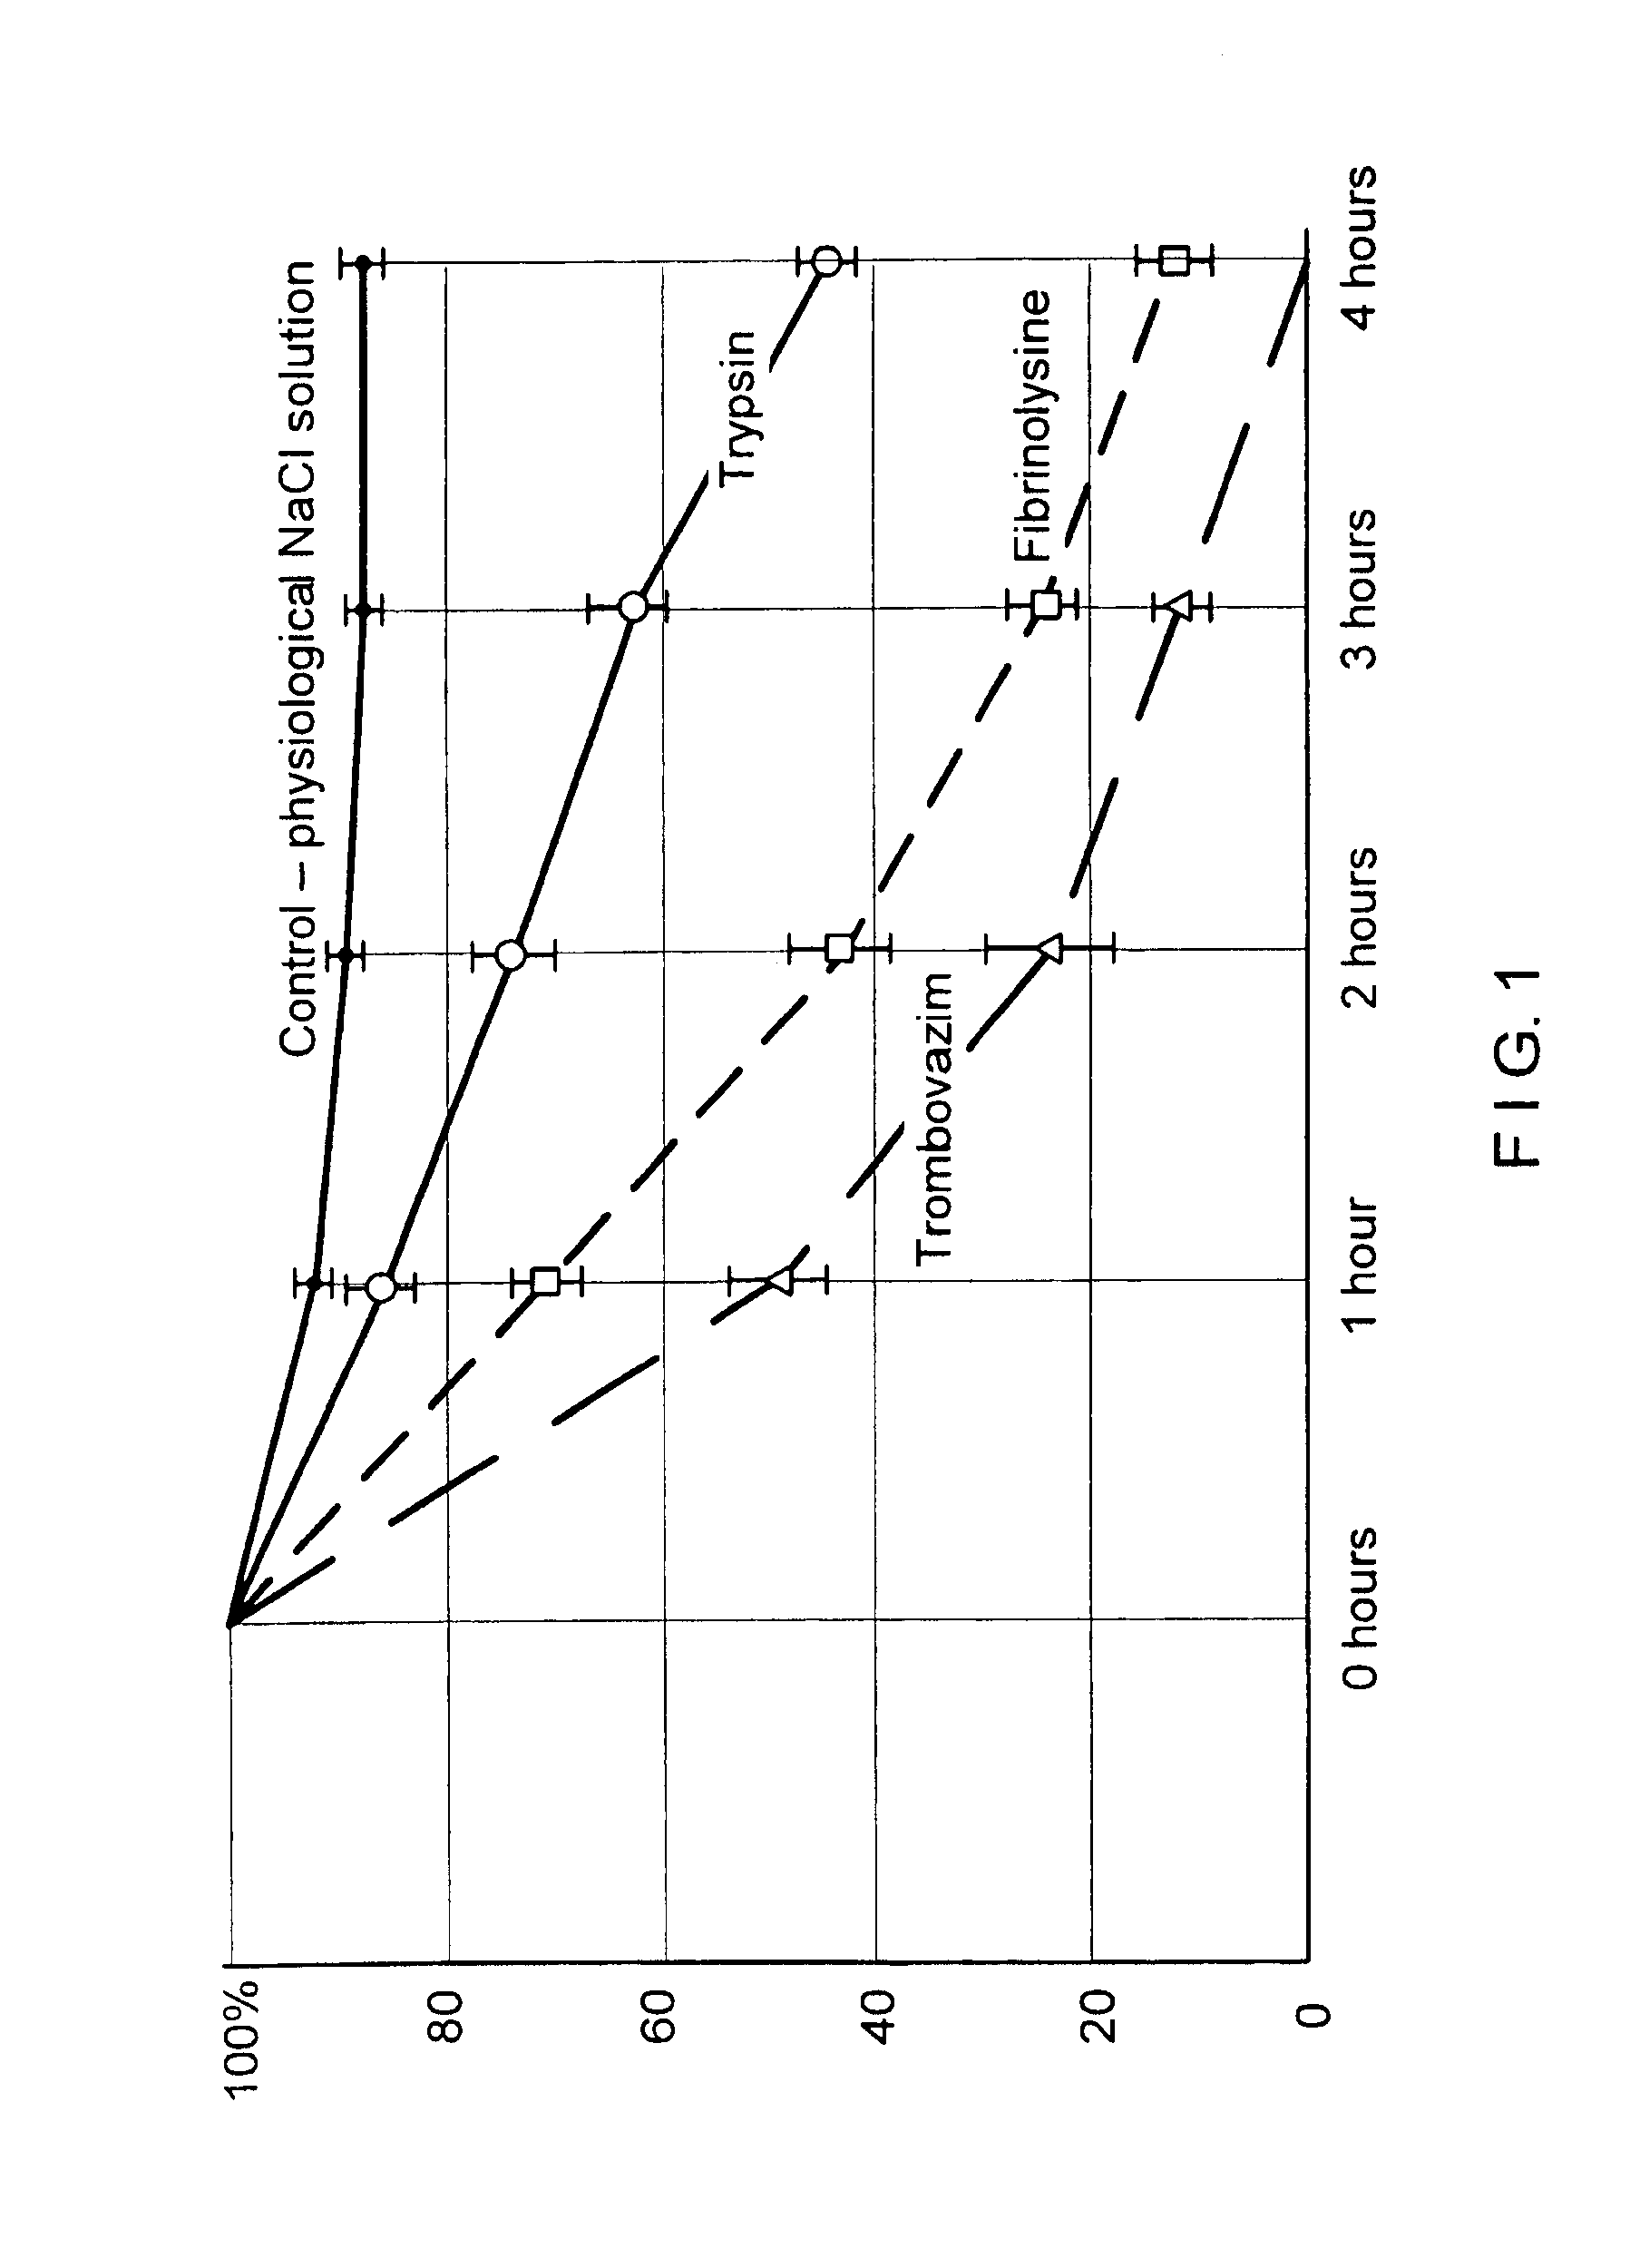 Therapeutic composition containing a plurality of immobilized proteases